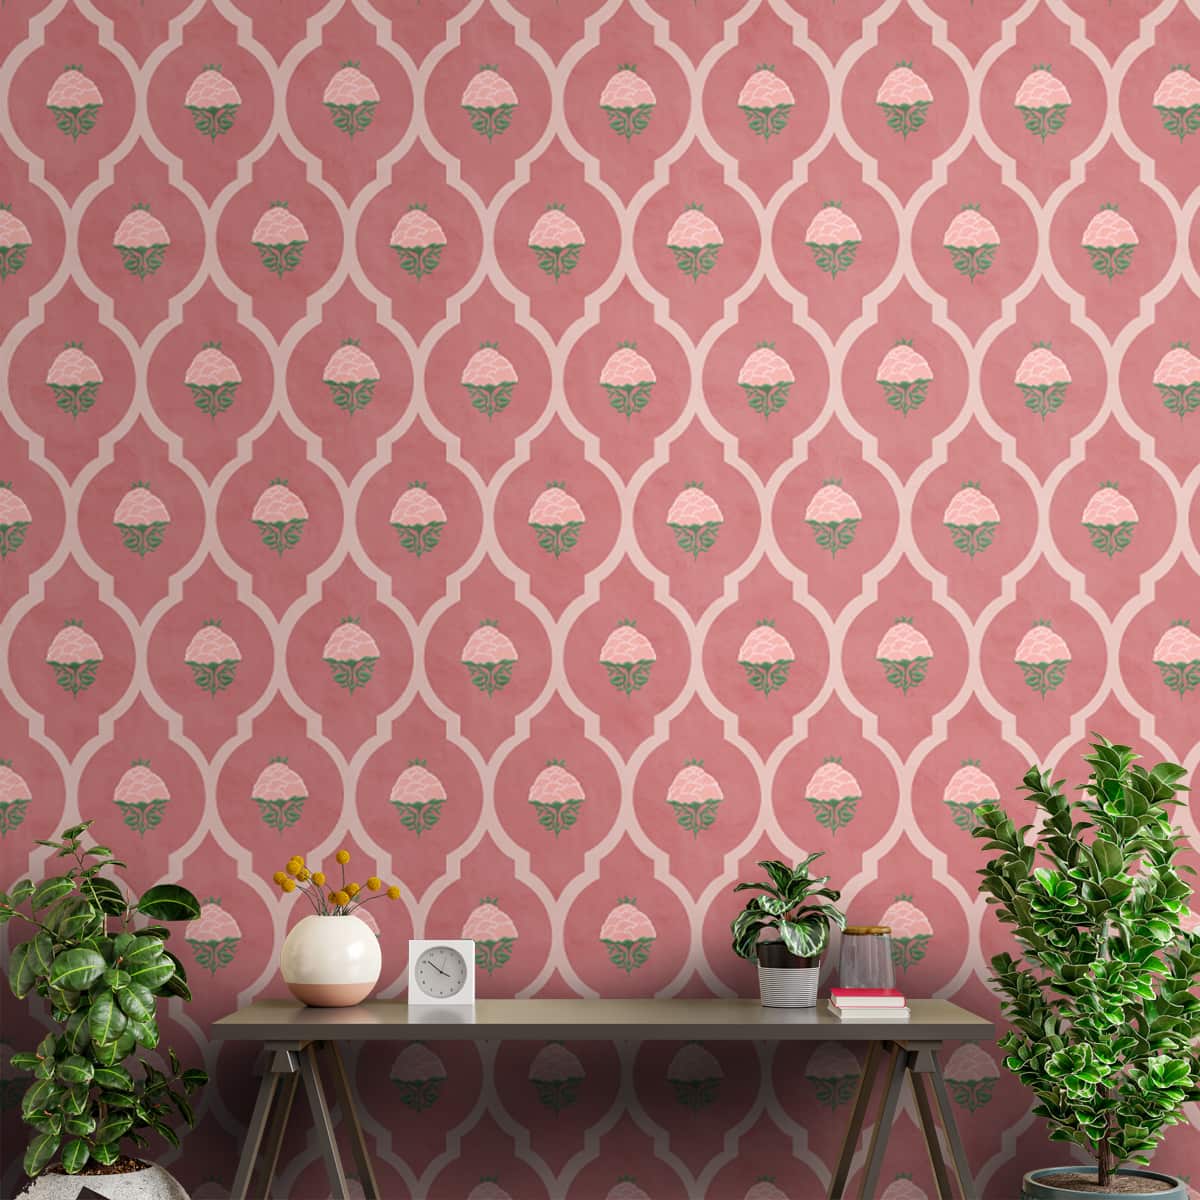 Best removable wallpapers 2022: Peel and stick designs to spruce up your  living space | The Independent